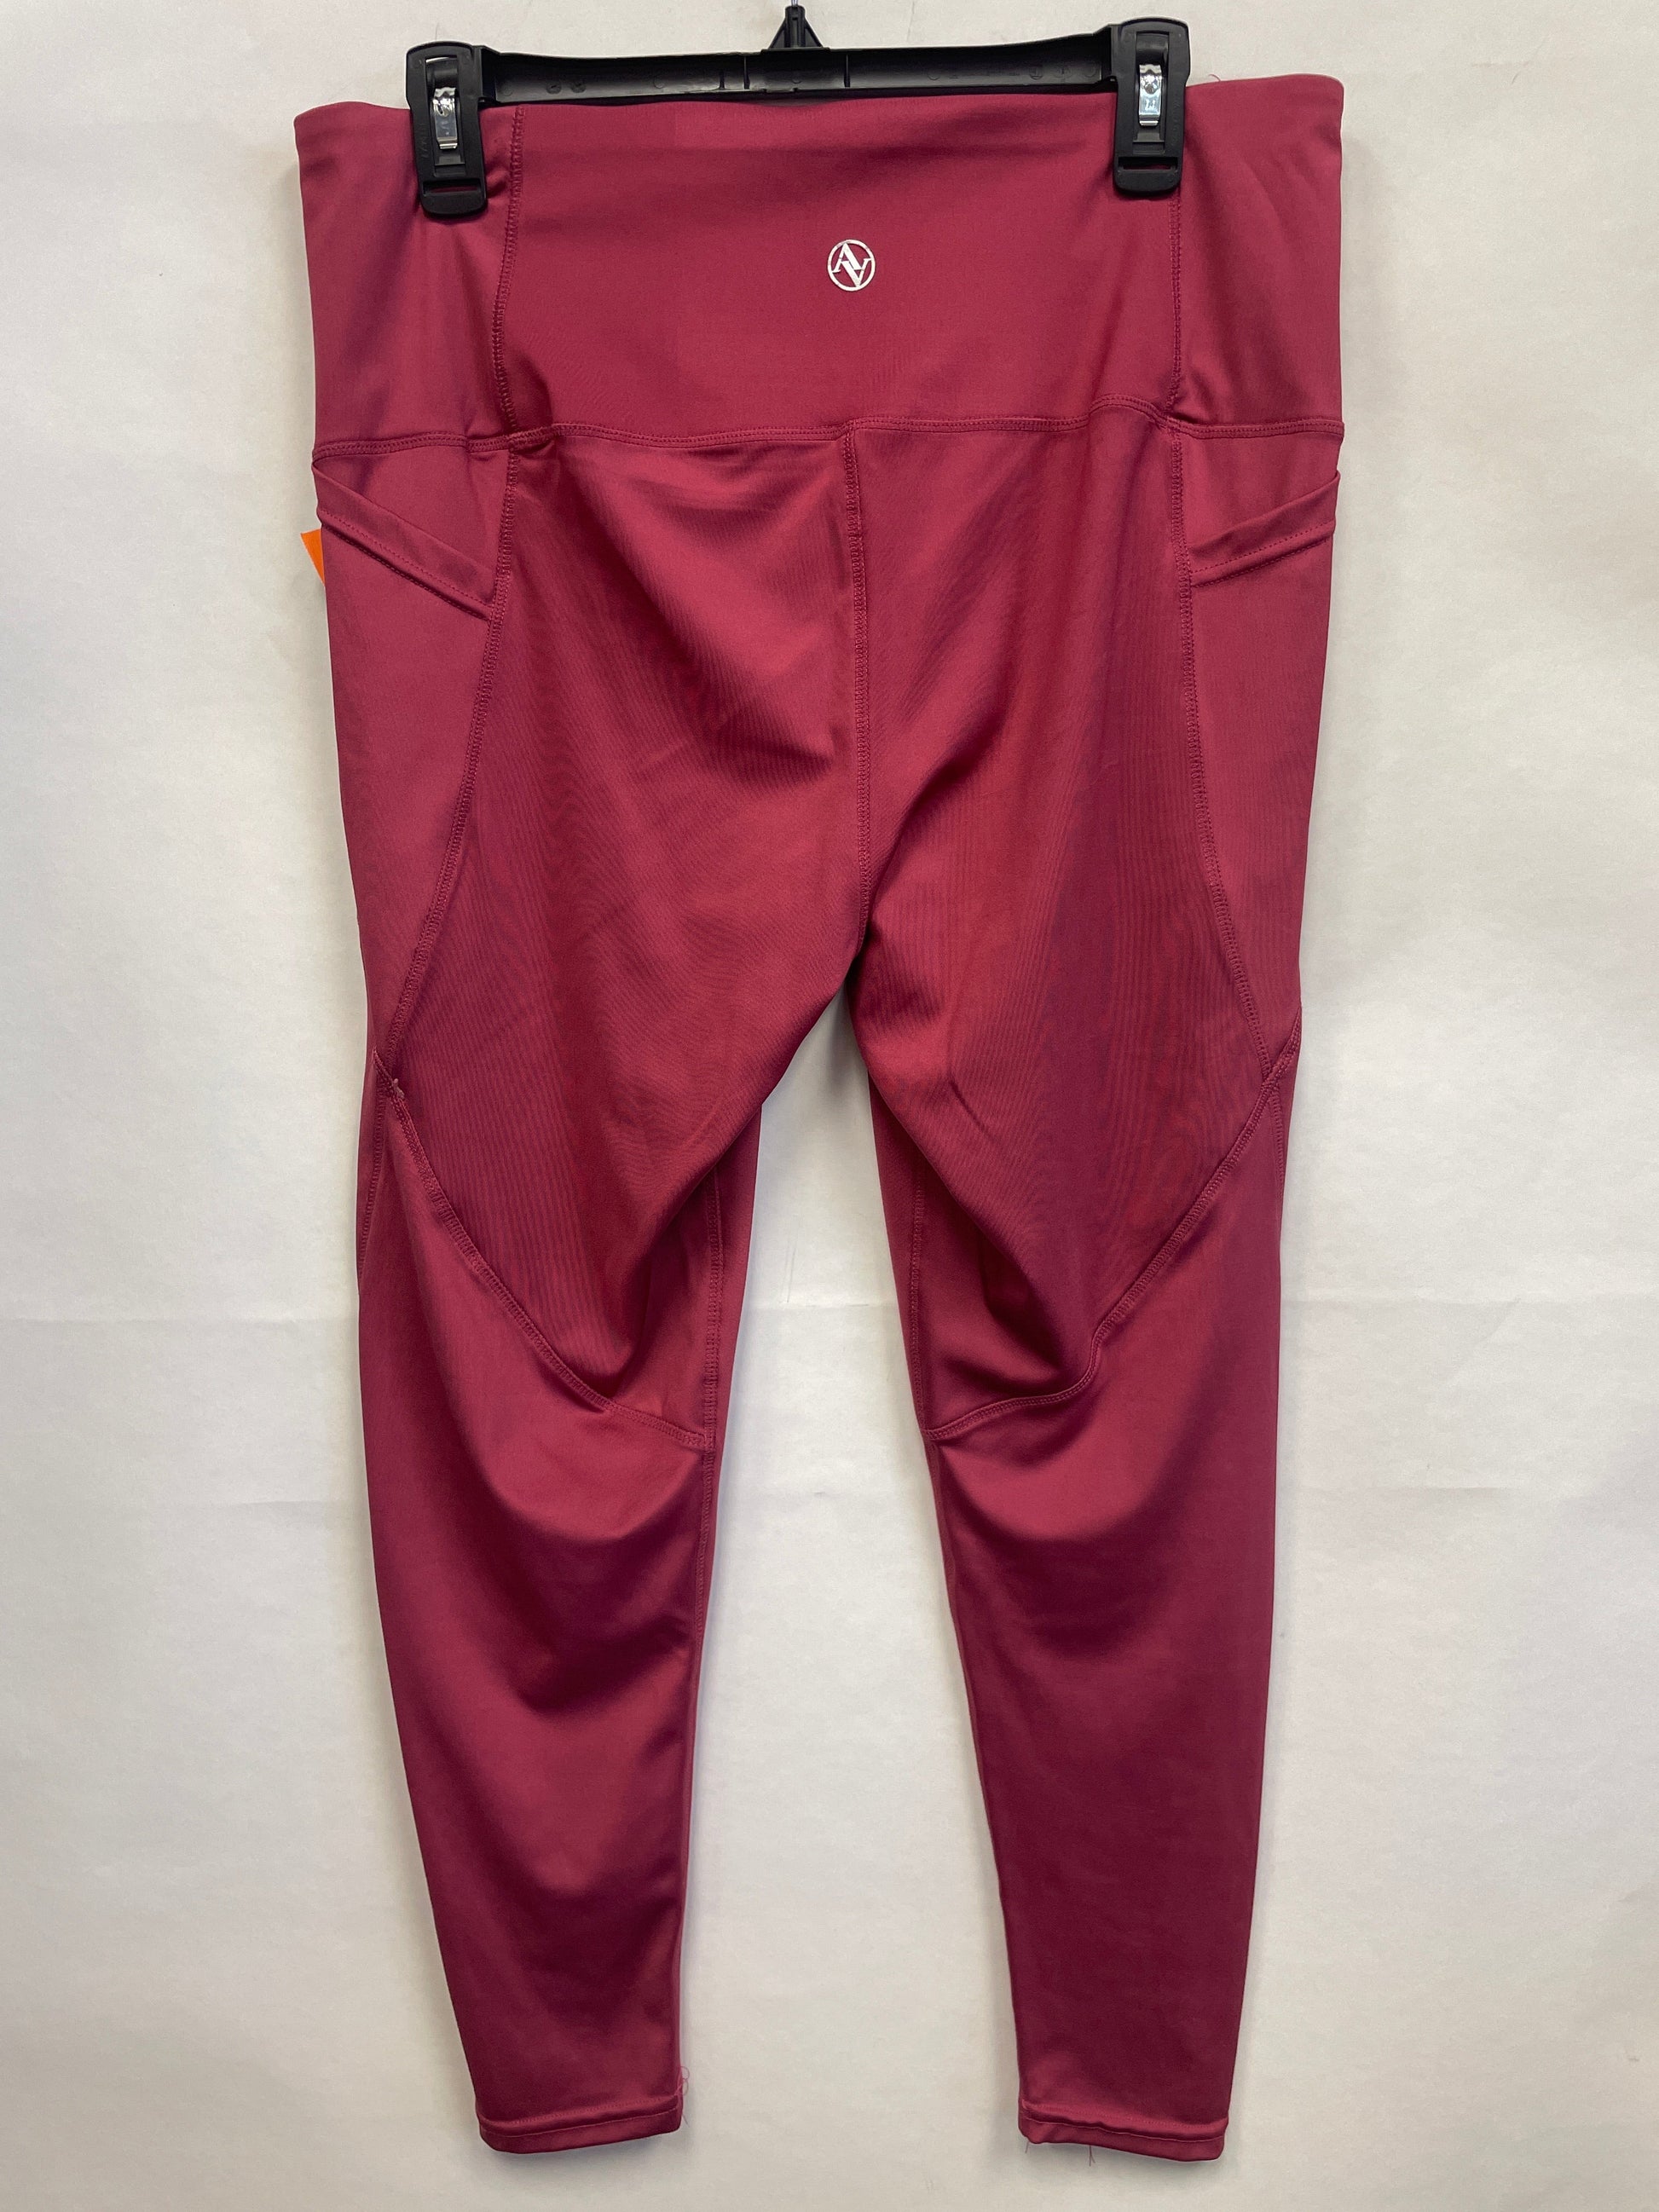 Athletic Leggings By Aerie Size: L